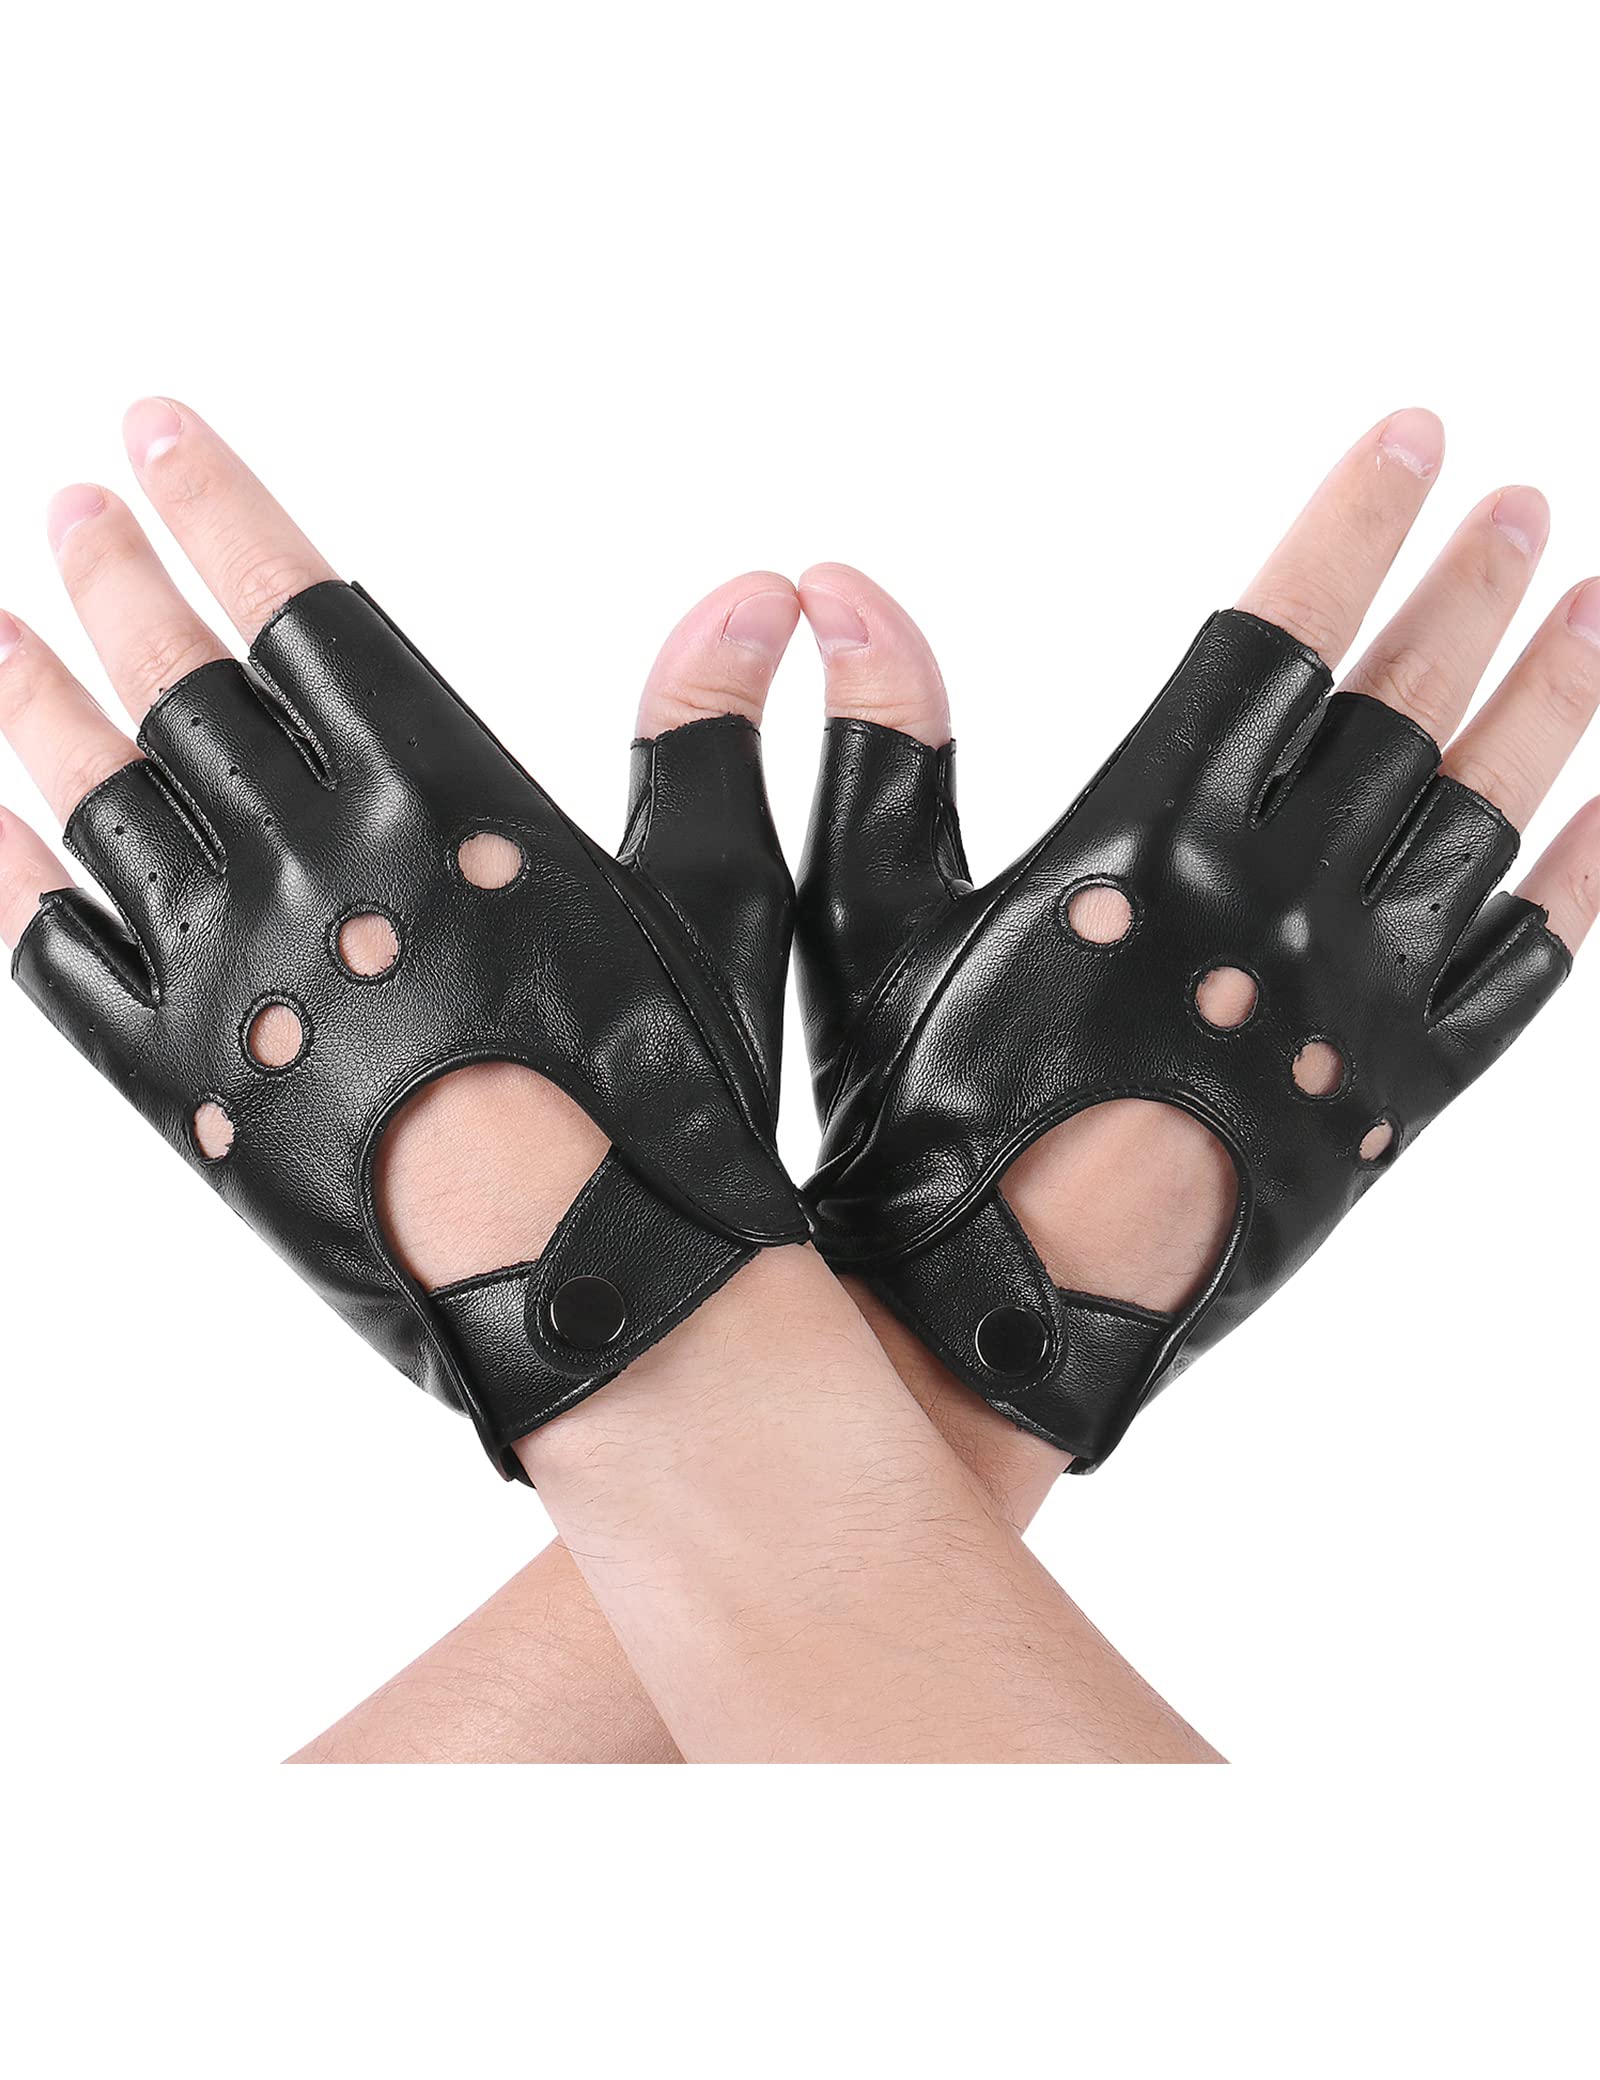  FLORVIV Black Fingerless Gloves PU Faux Leather Goth Cosplay  Costume Punk Halloween Performance for Women Girls : Clothing, Shoes 